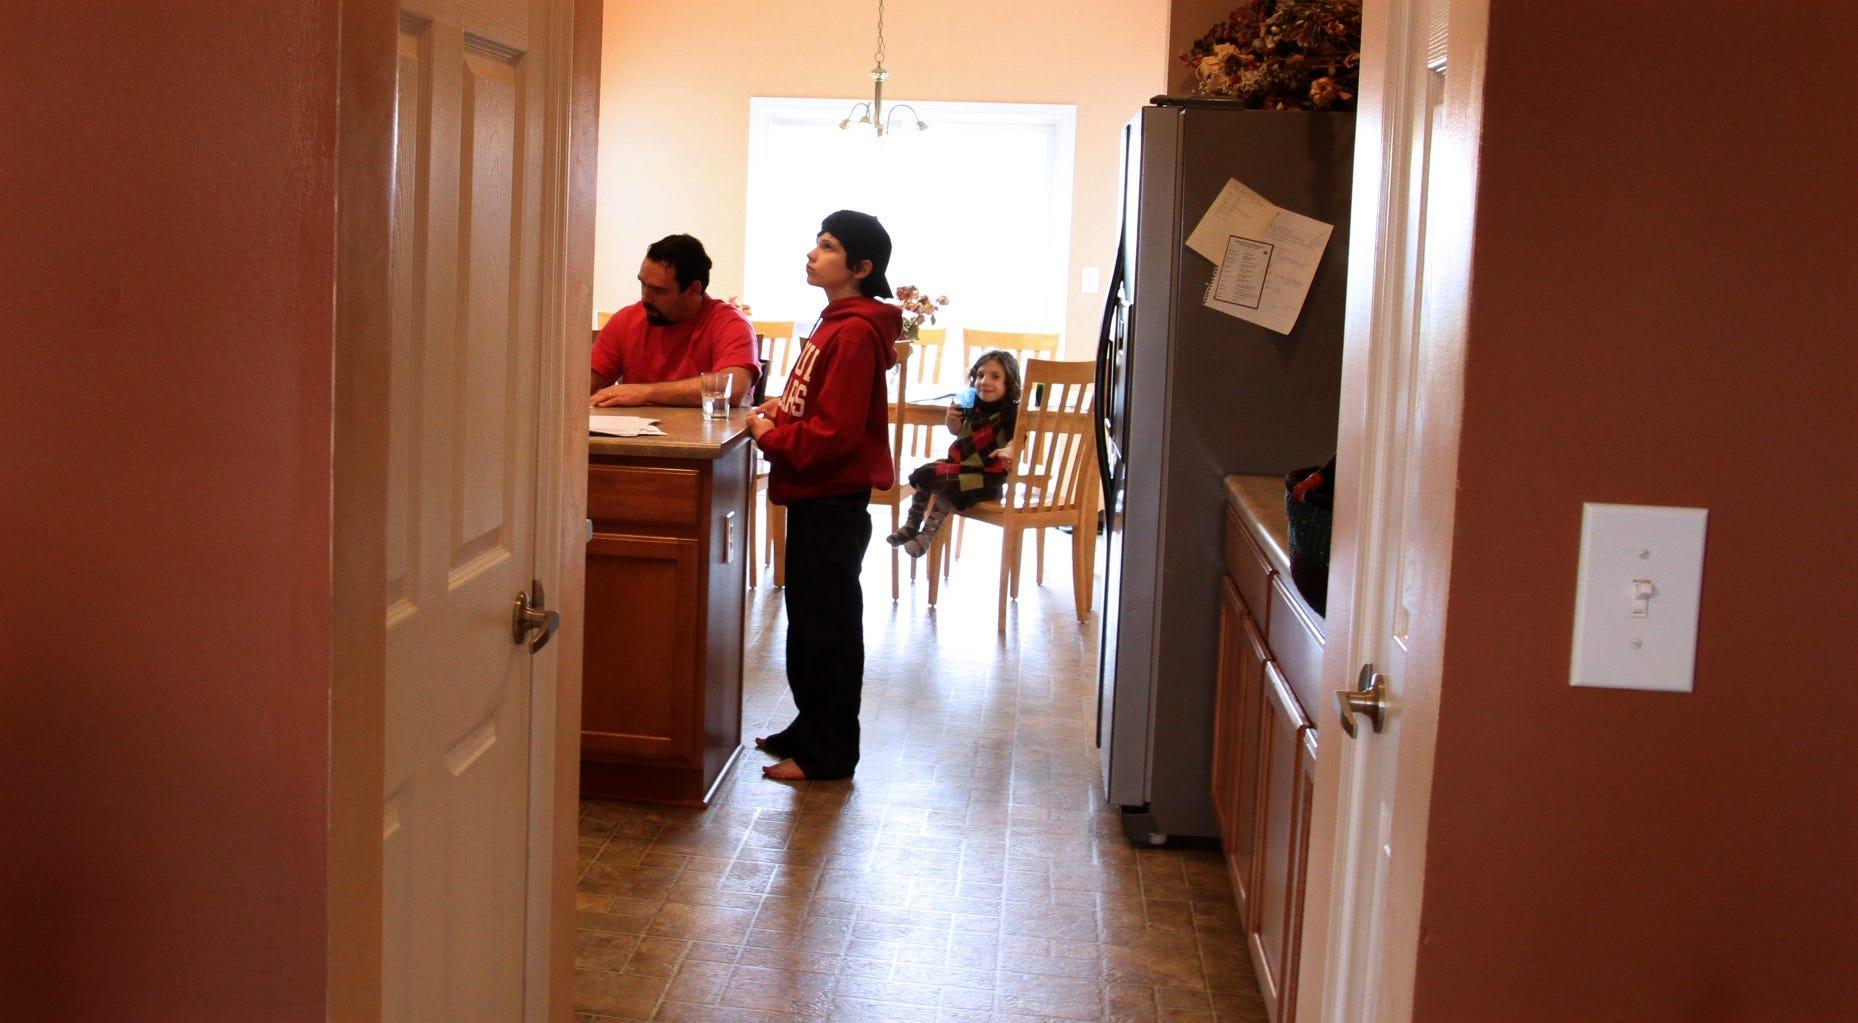 In this March 2011 file photo from the Indianapolis Star, Jake Barnett, 12, center, takes a break from studying for his college finals. In the background, Natalia Barnett sits on a kitchen chair, and Michael Barnett is seen at the kitchen island.